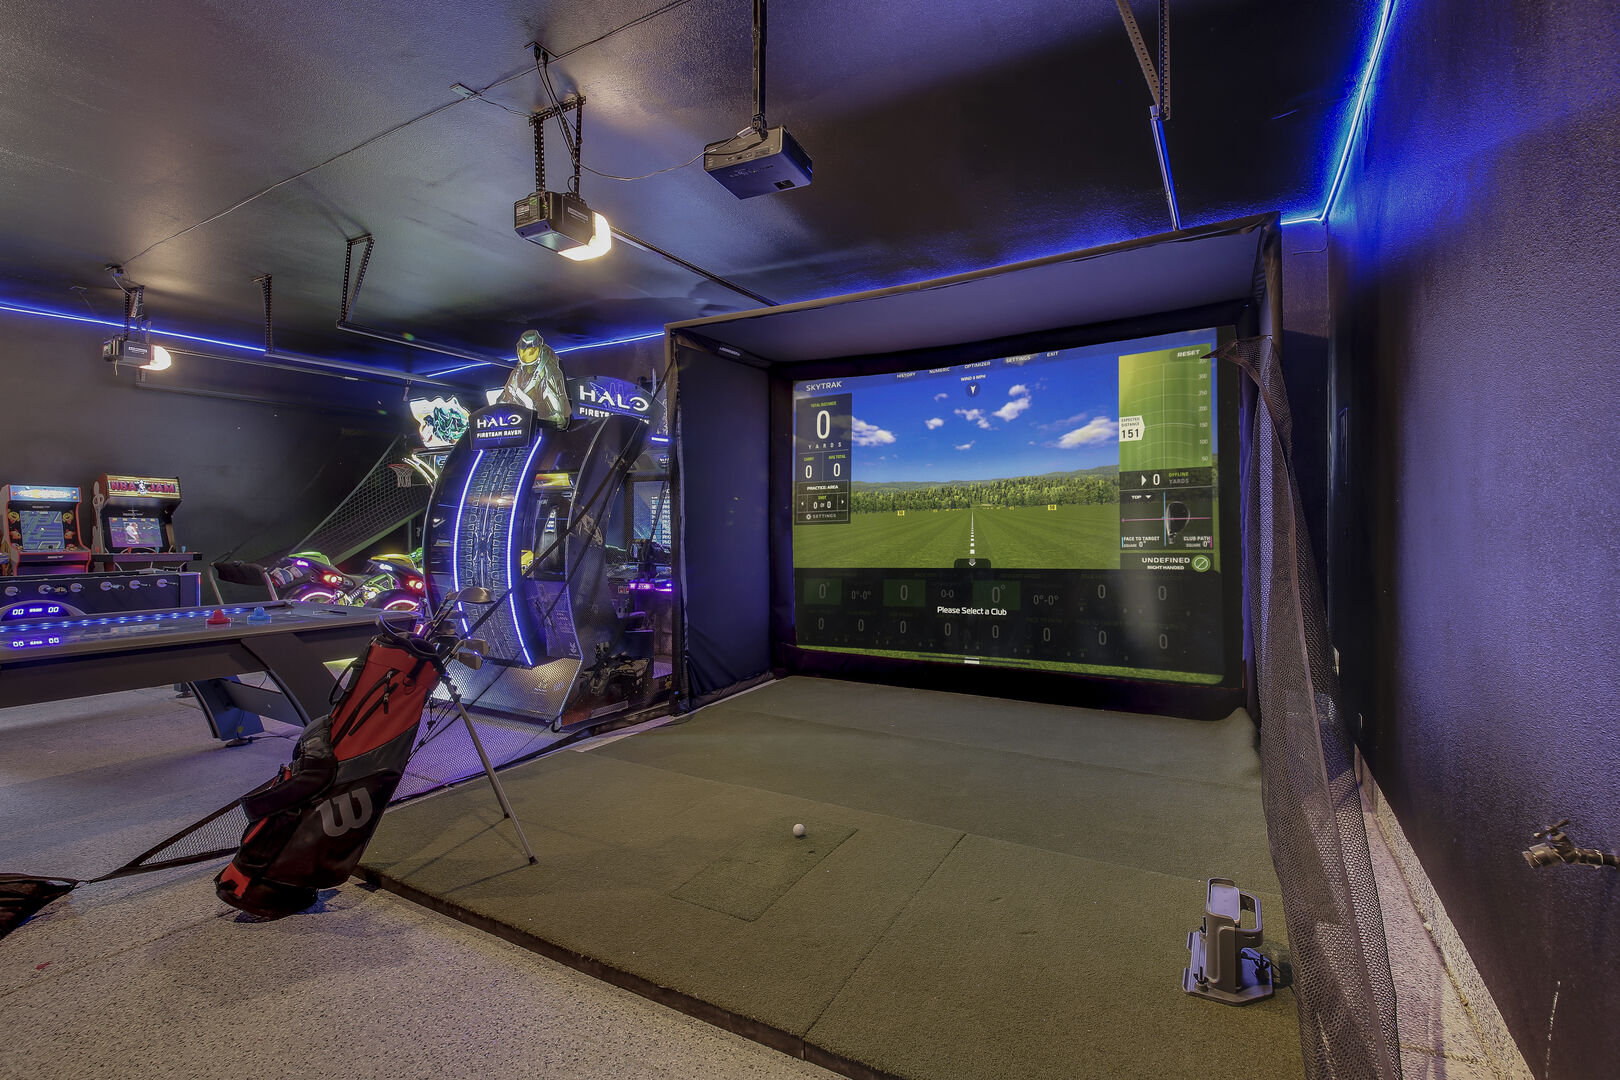 Game on! Our game room is packed with excitement, from classic arcade games to modern consoles and a golf simulator!